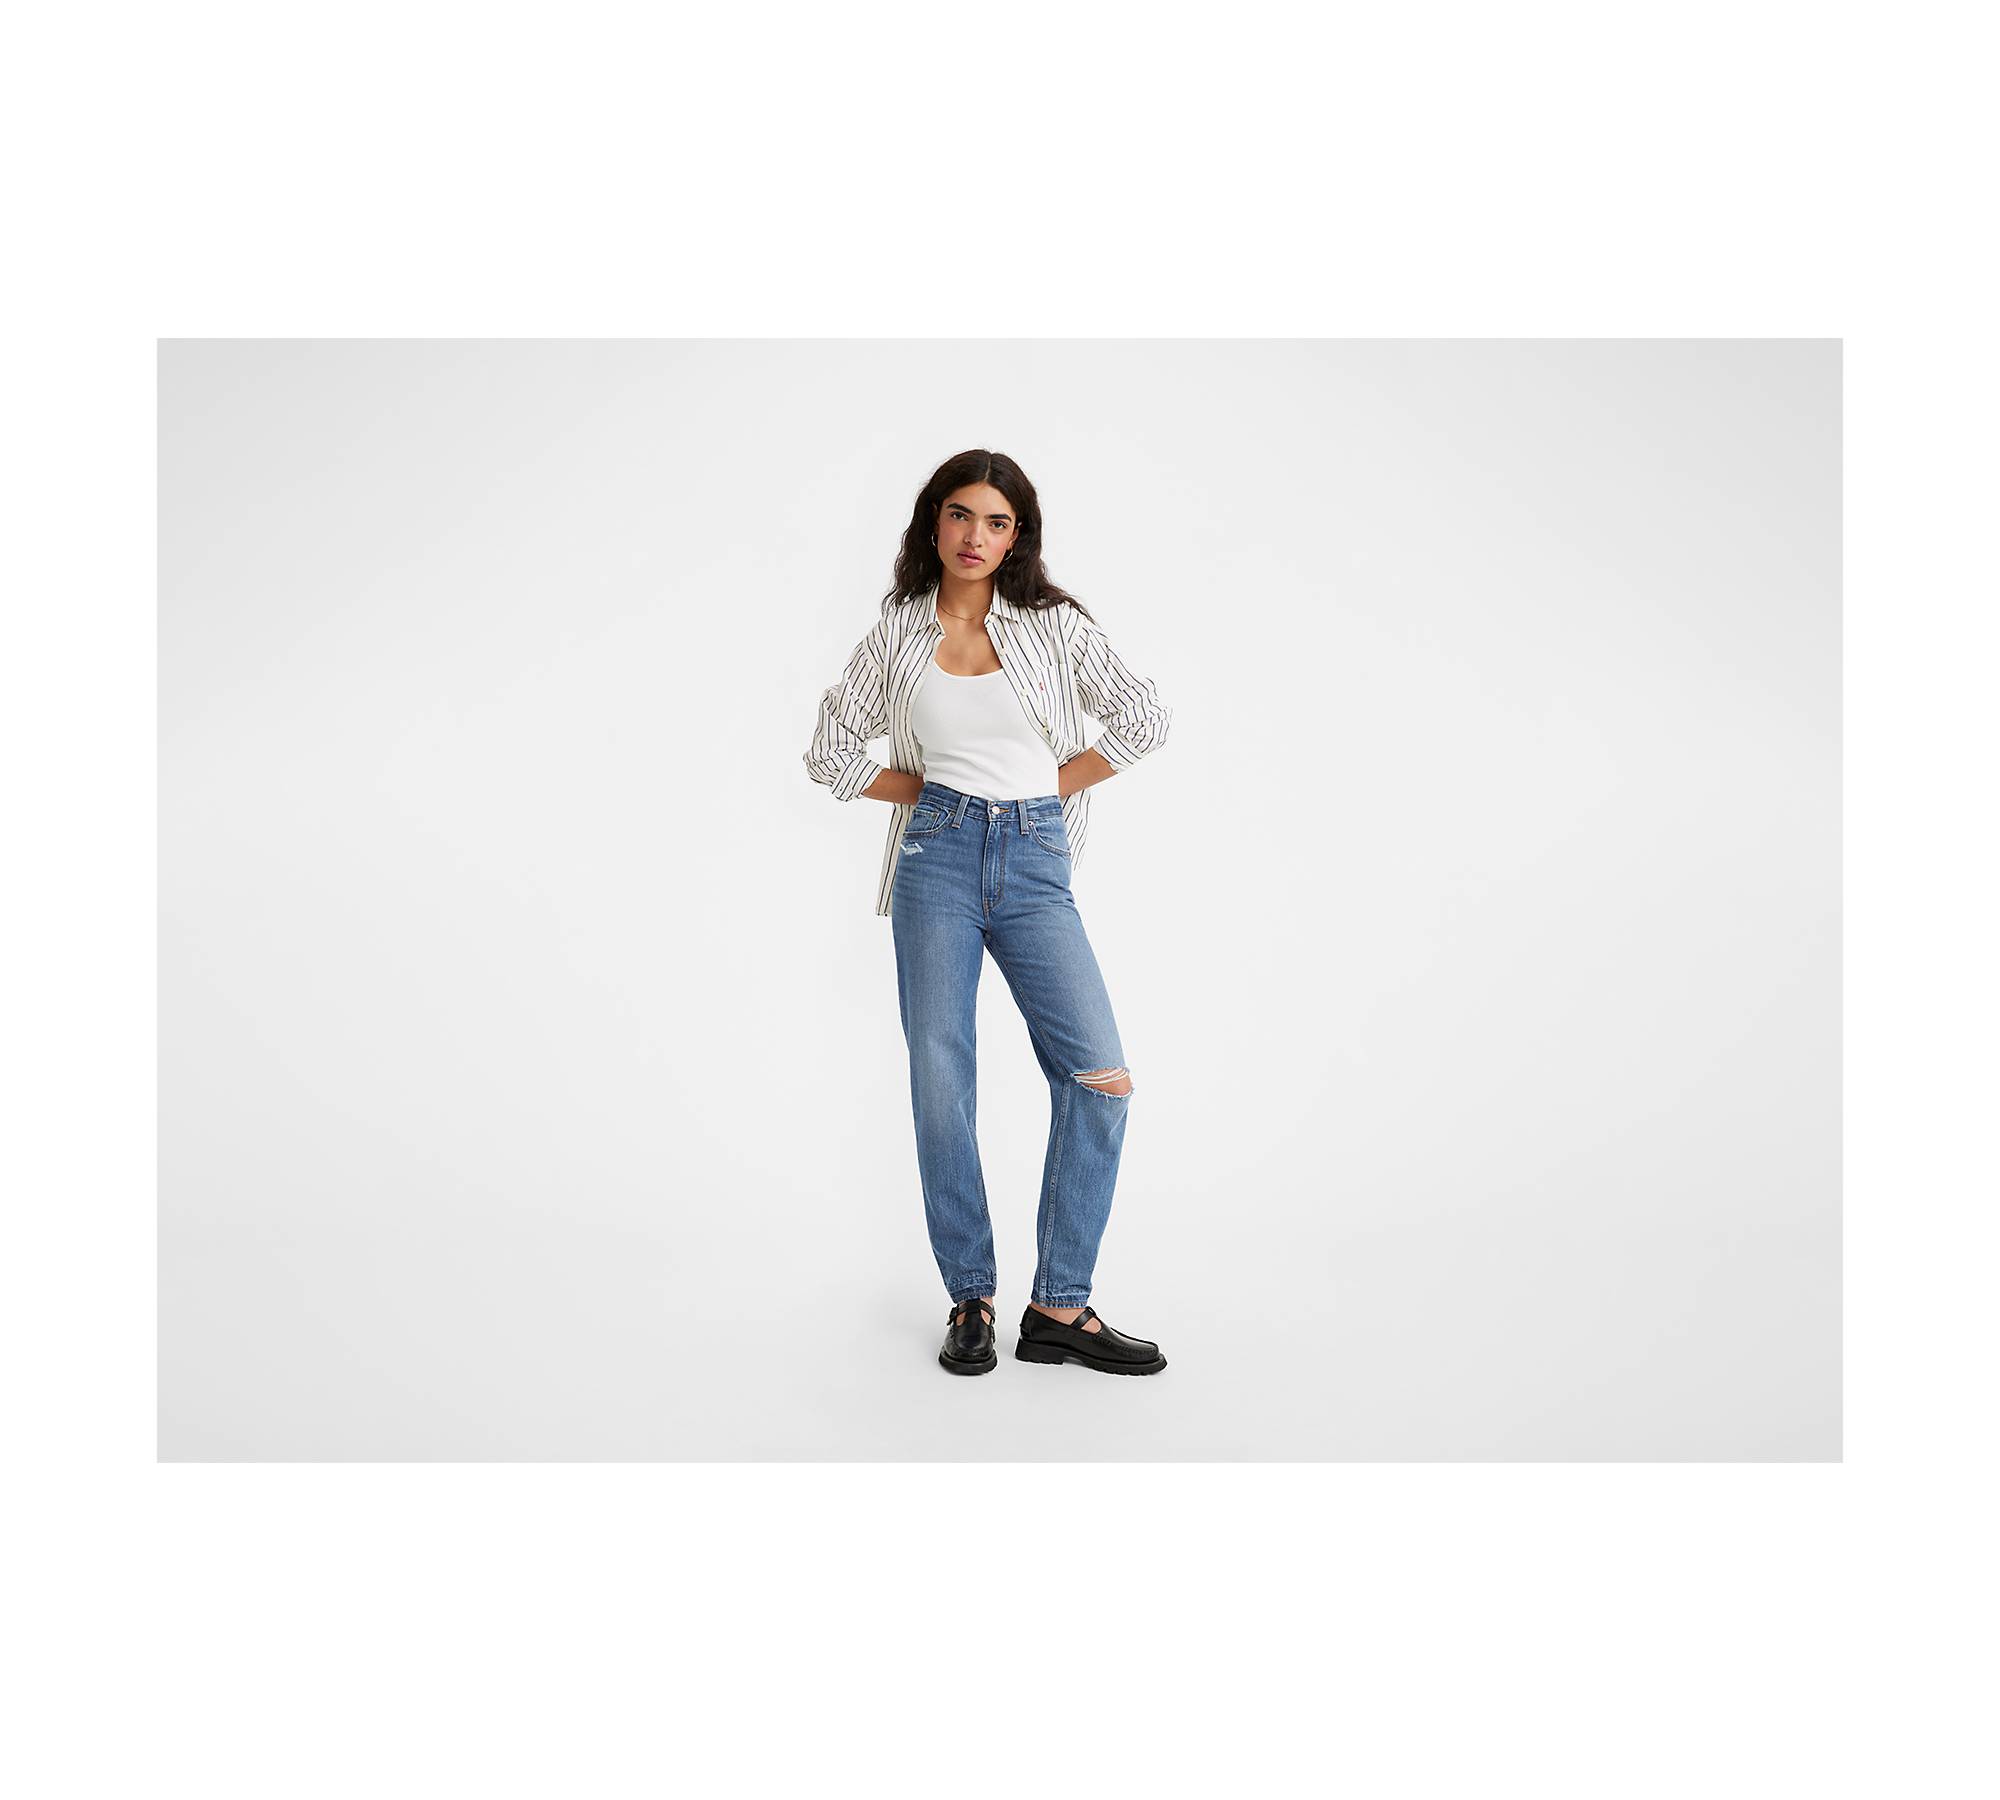 80s Stone Wash Lee Tapered Mom Jeans Big Booty Size 16 Petite